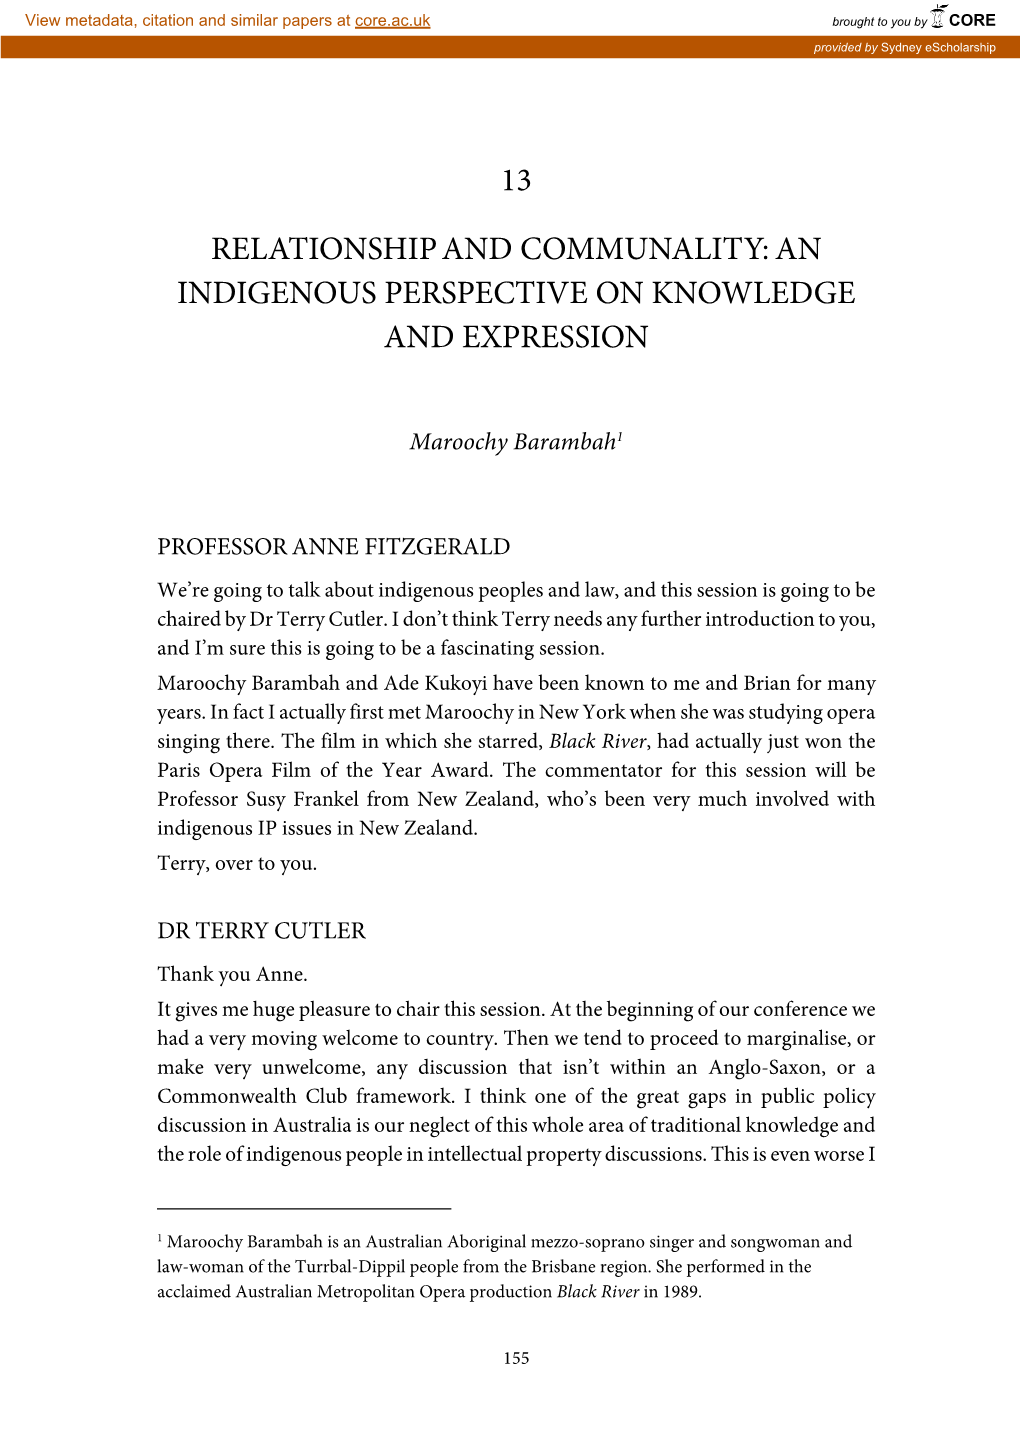 13 Relationship and Communality: an Indigenous